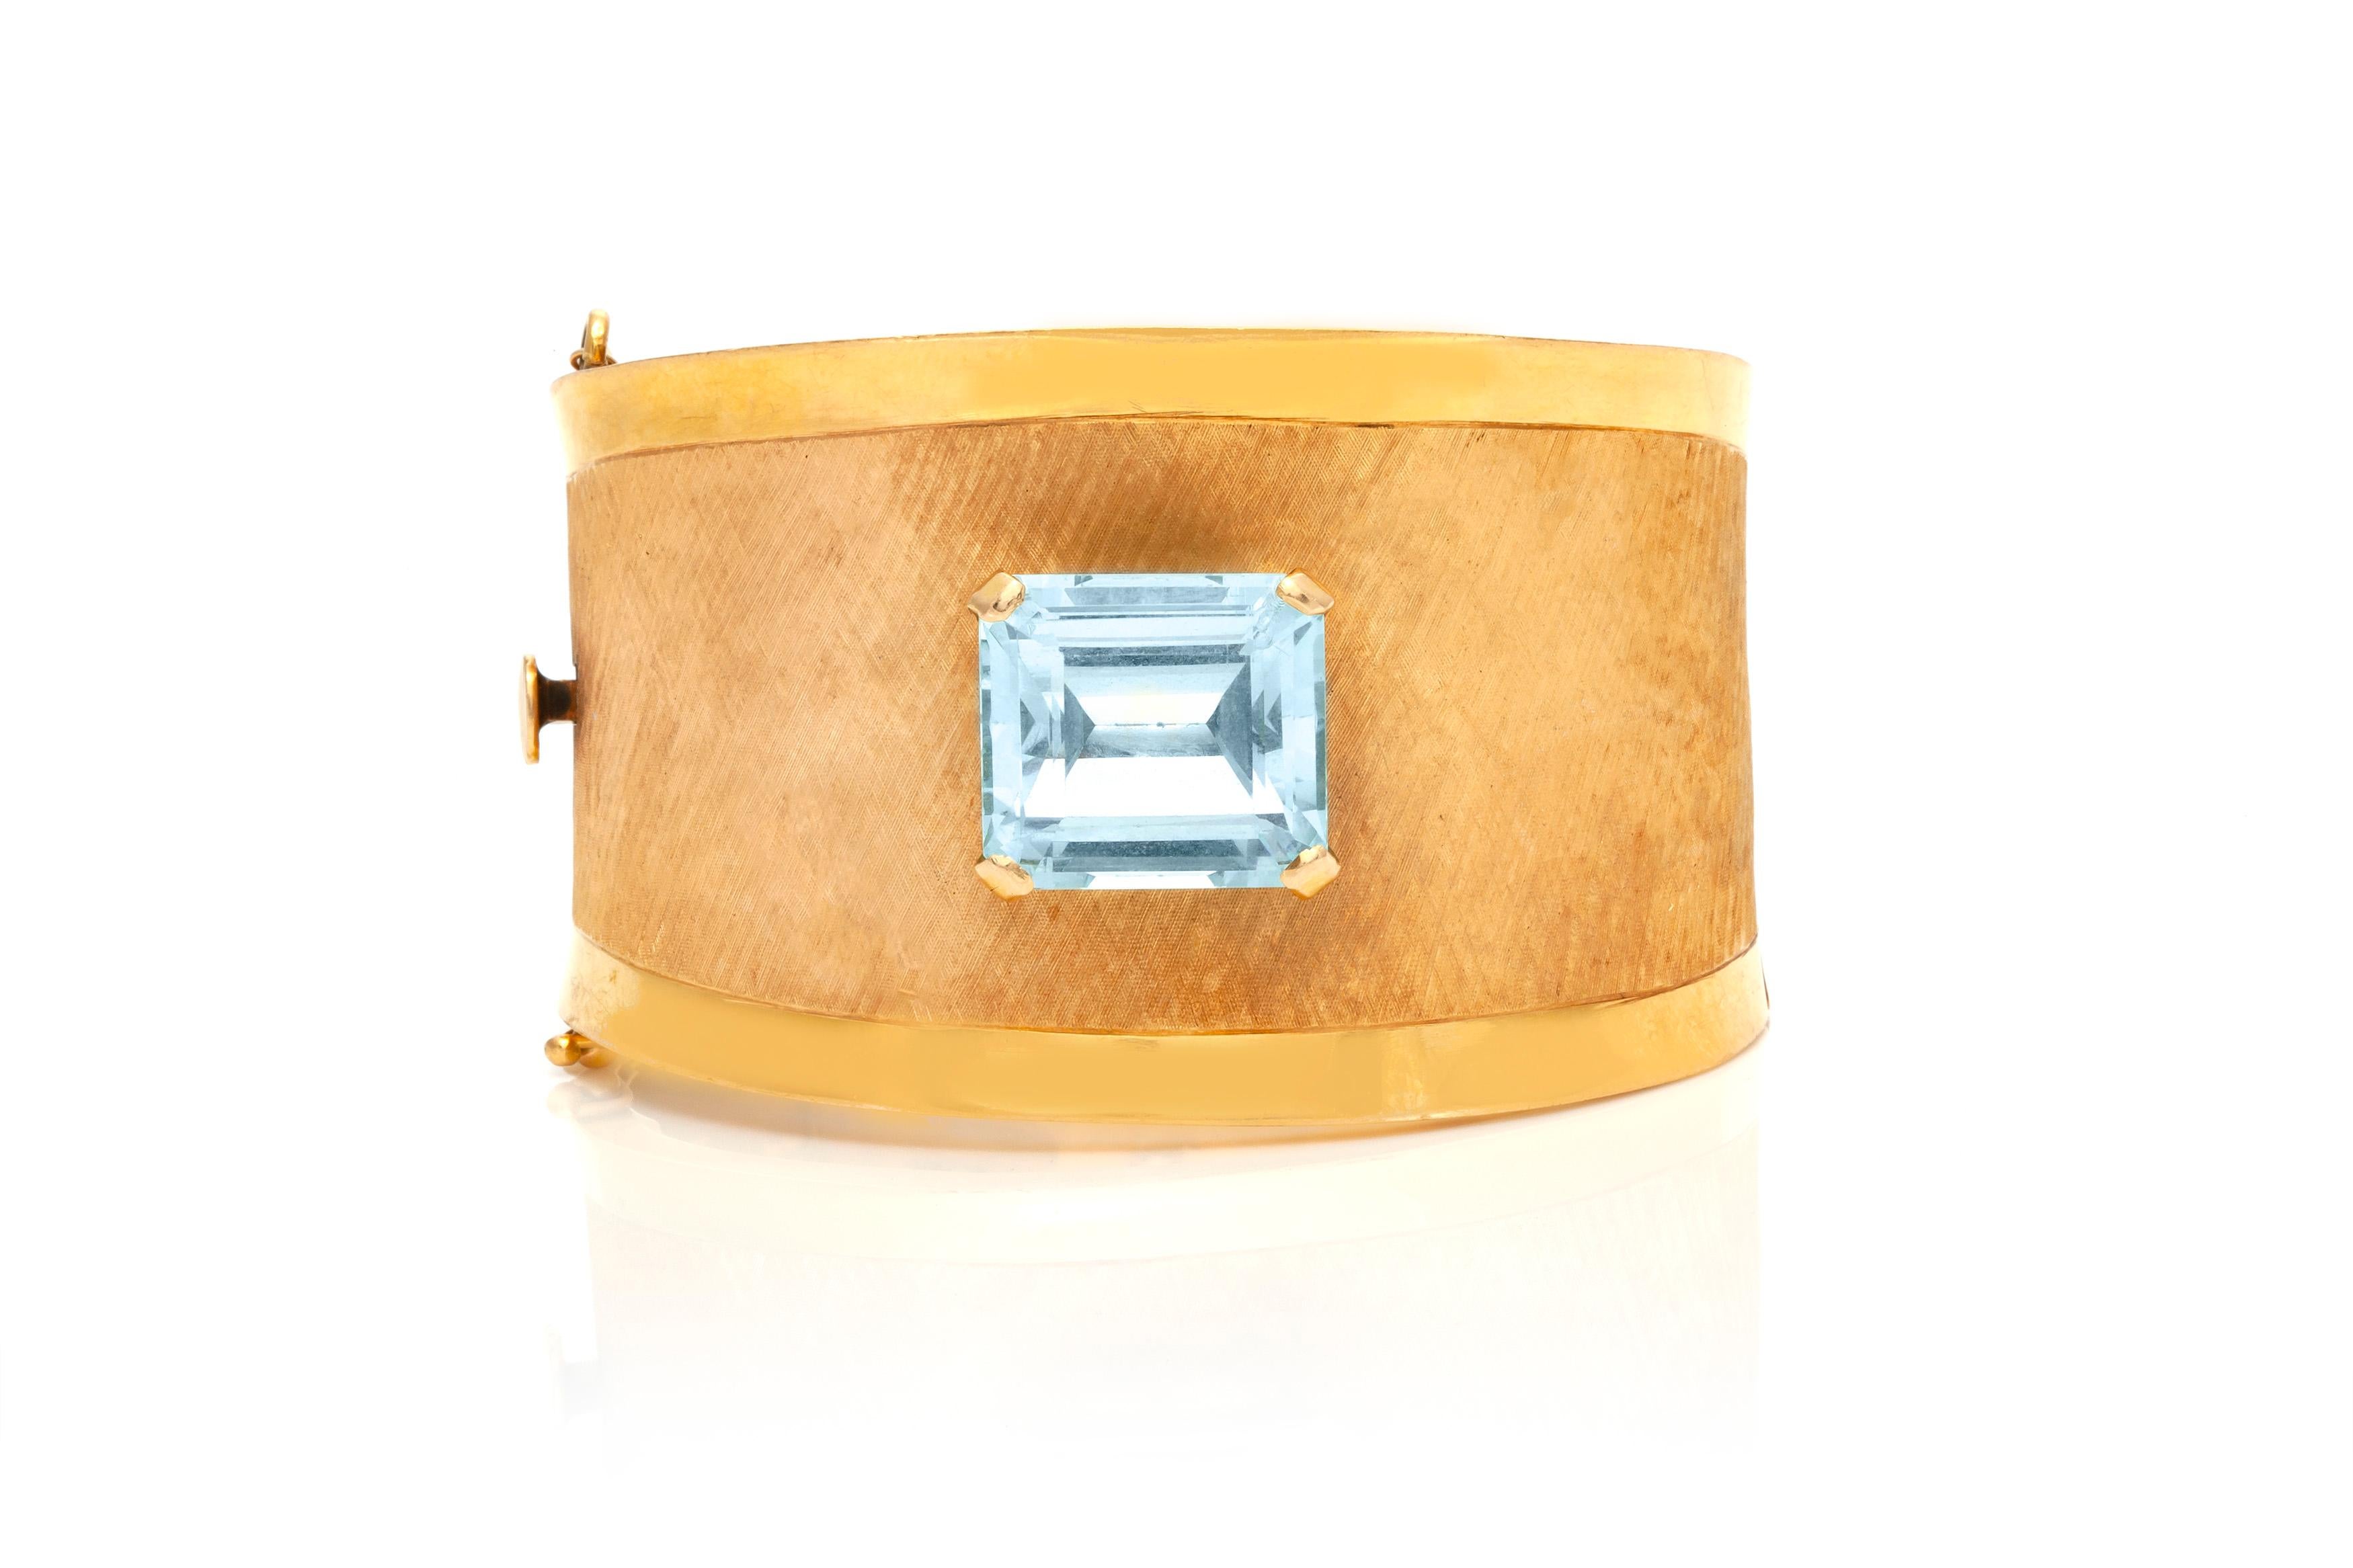 The cuff bracelet is finely crafted in 18k yellow gold with aquamarine center stone weighing approximately total of 20.00 carat.
